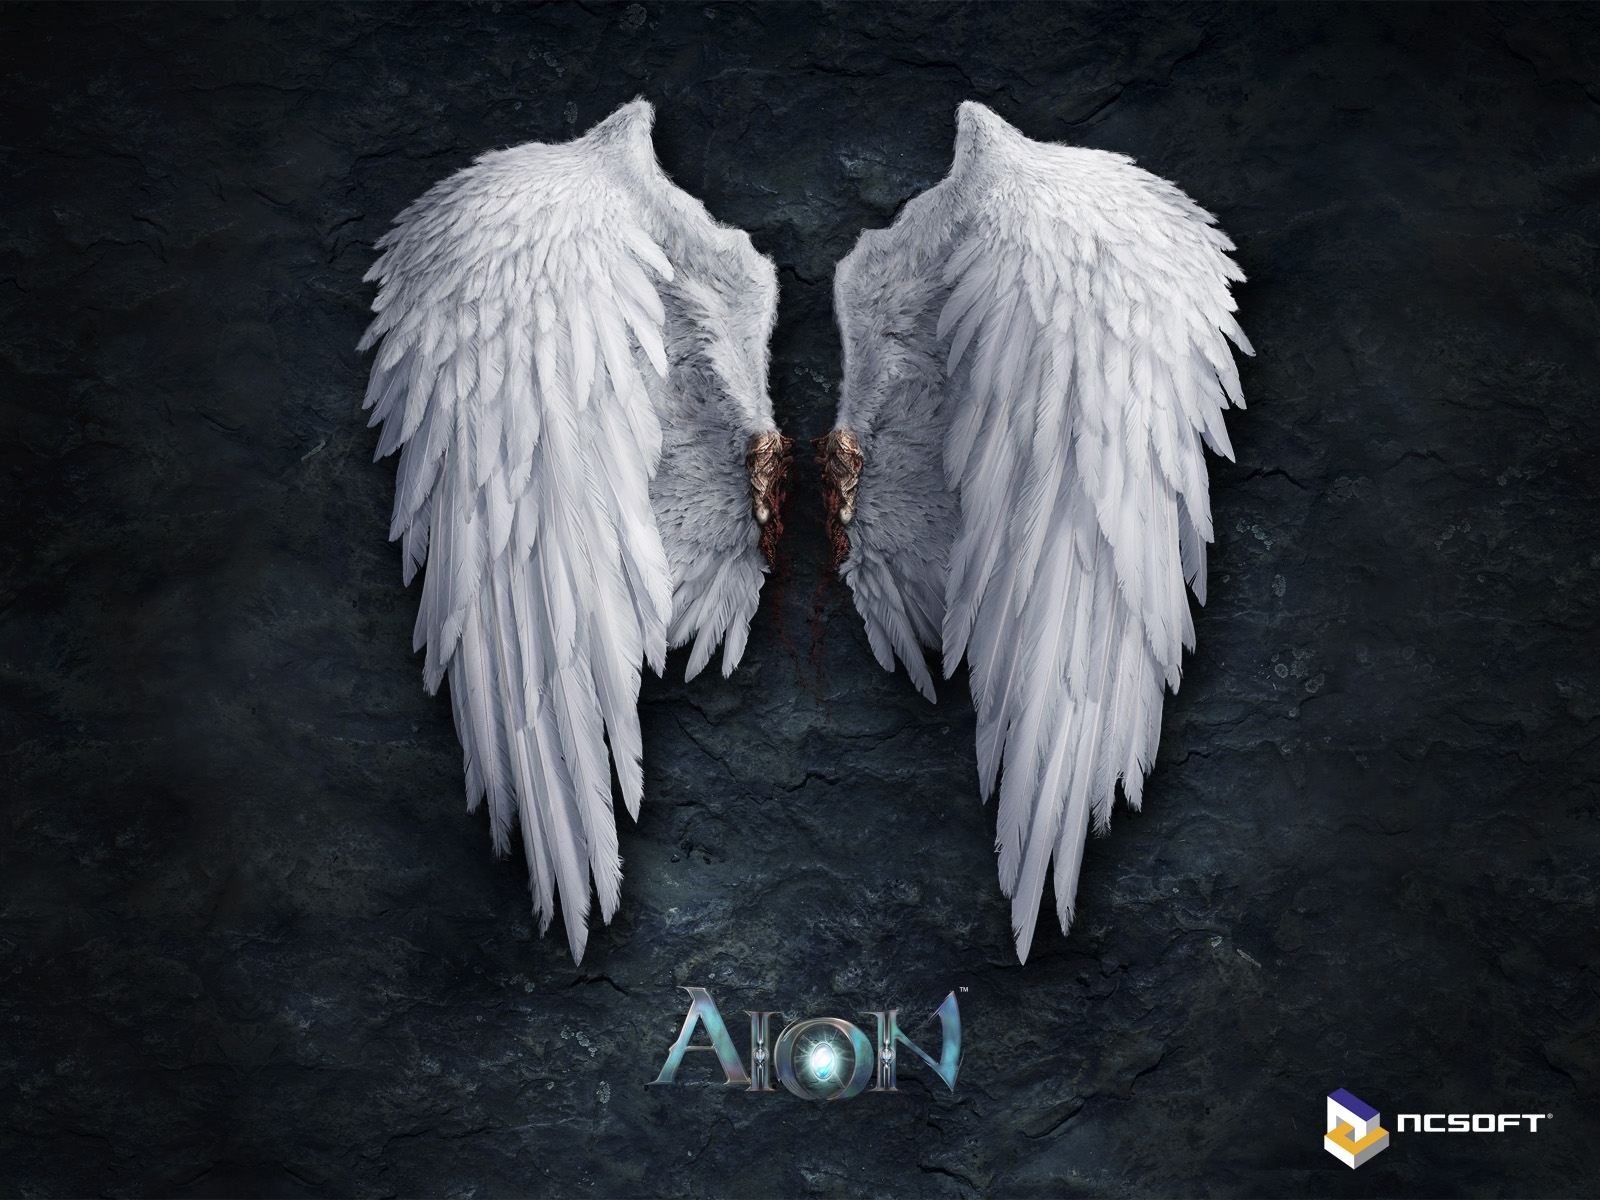 Mobile wallpaper games, aion